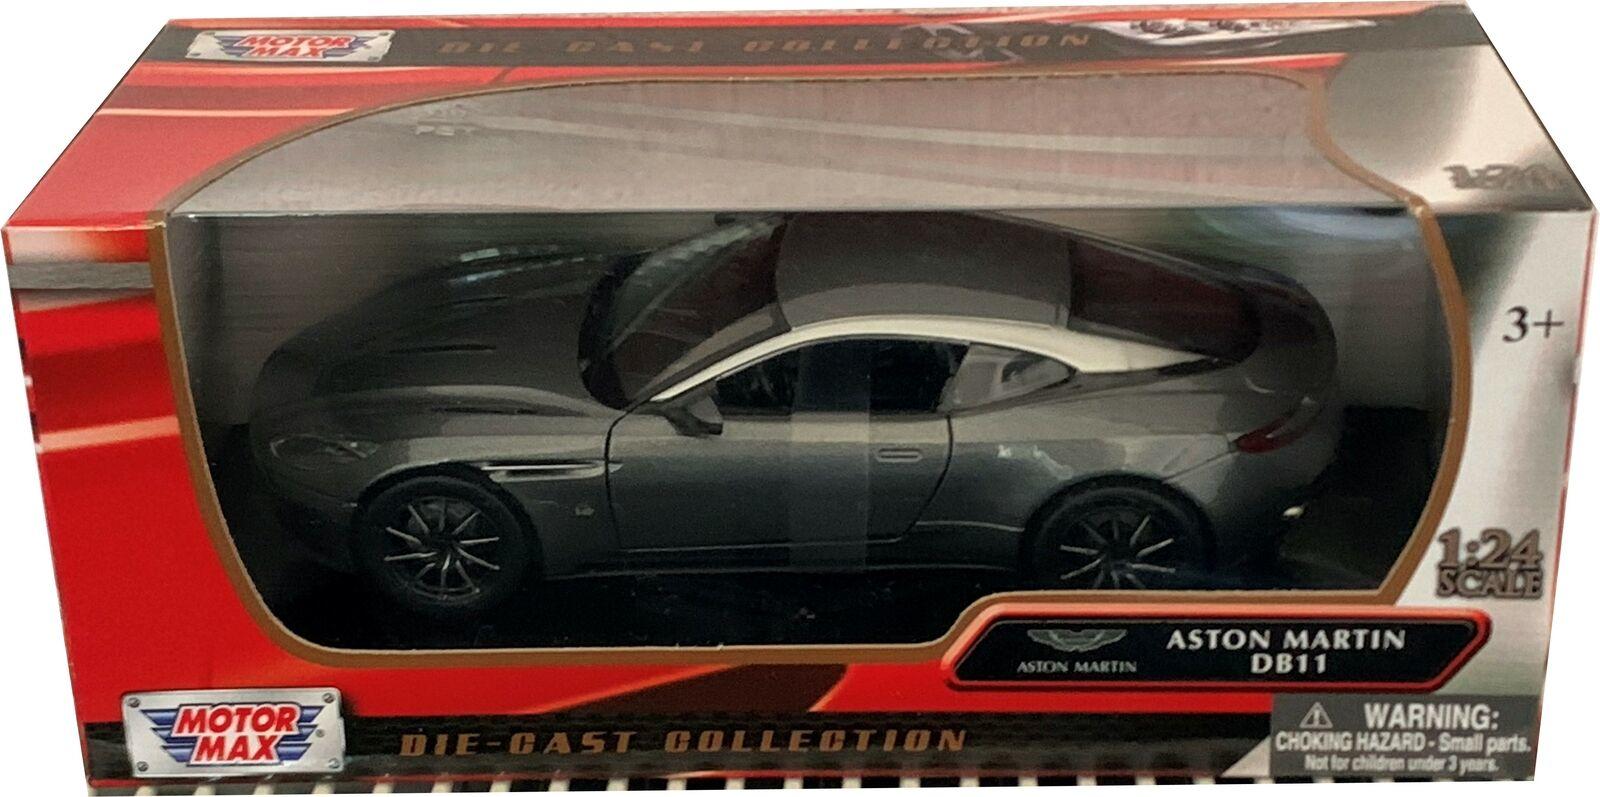 Aston Martin DB11 in magnetic silver 1:24 scale model from Motormax